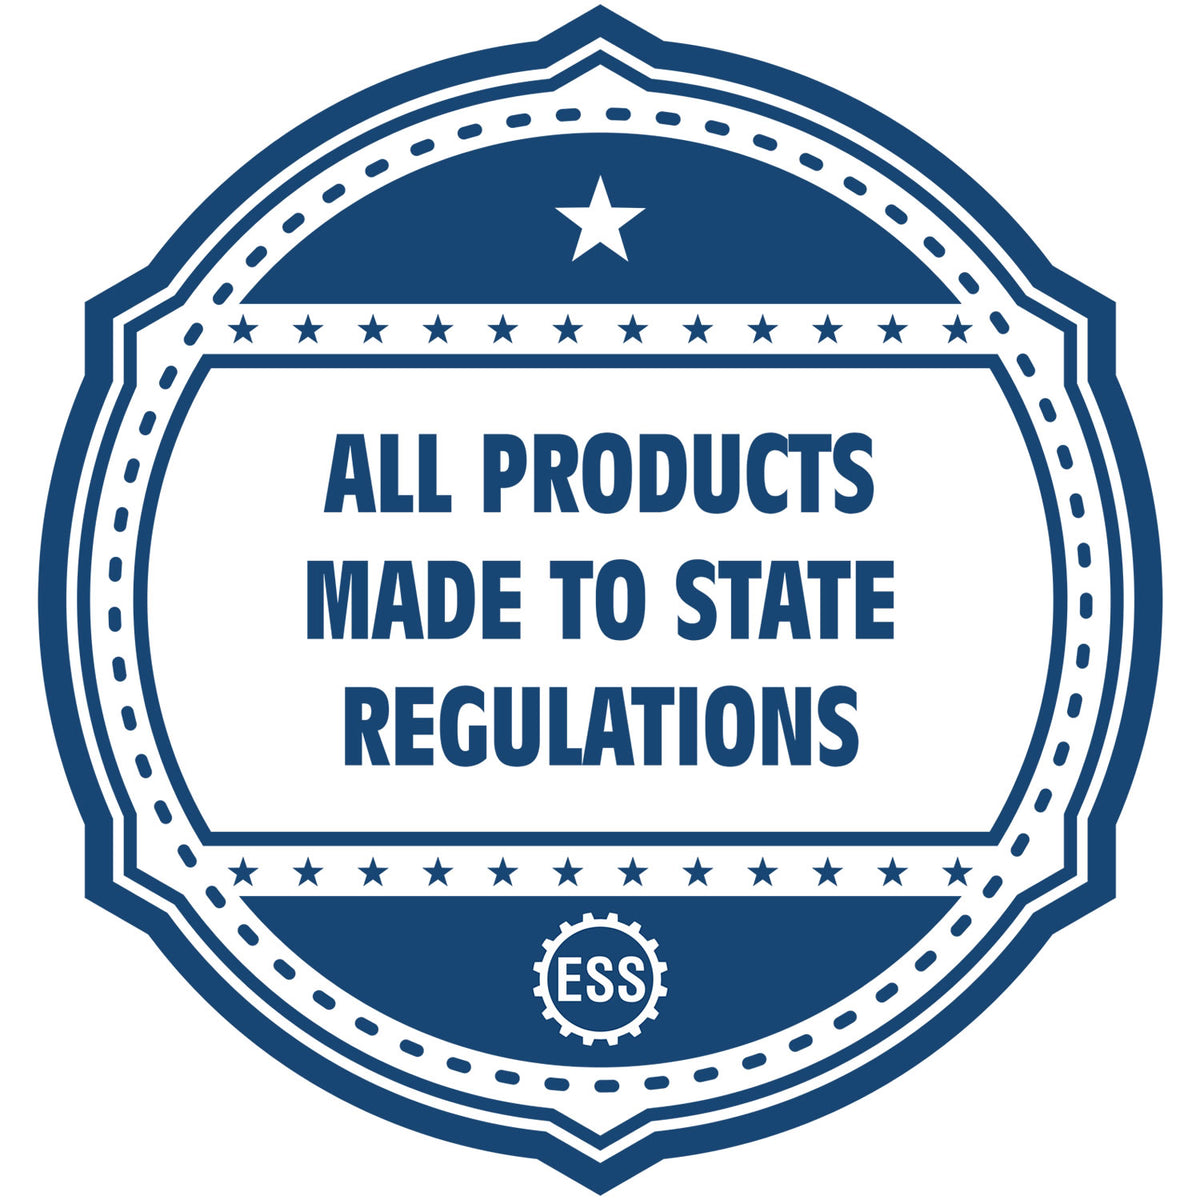 A blue icon or badge for the Hybrid District of Columbia Architect Seal showing that this product is made in compliance with state regulations.